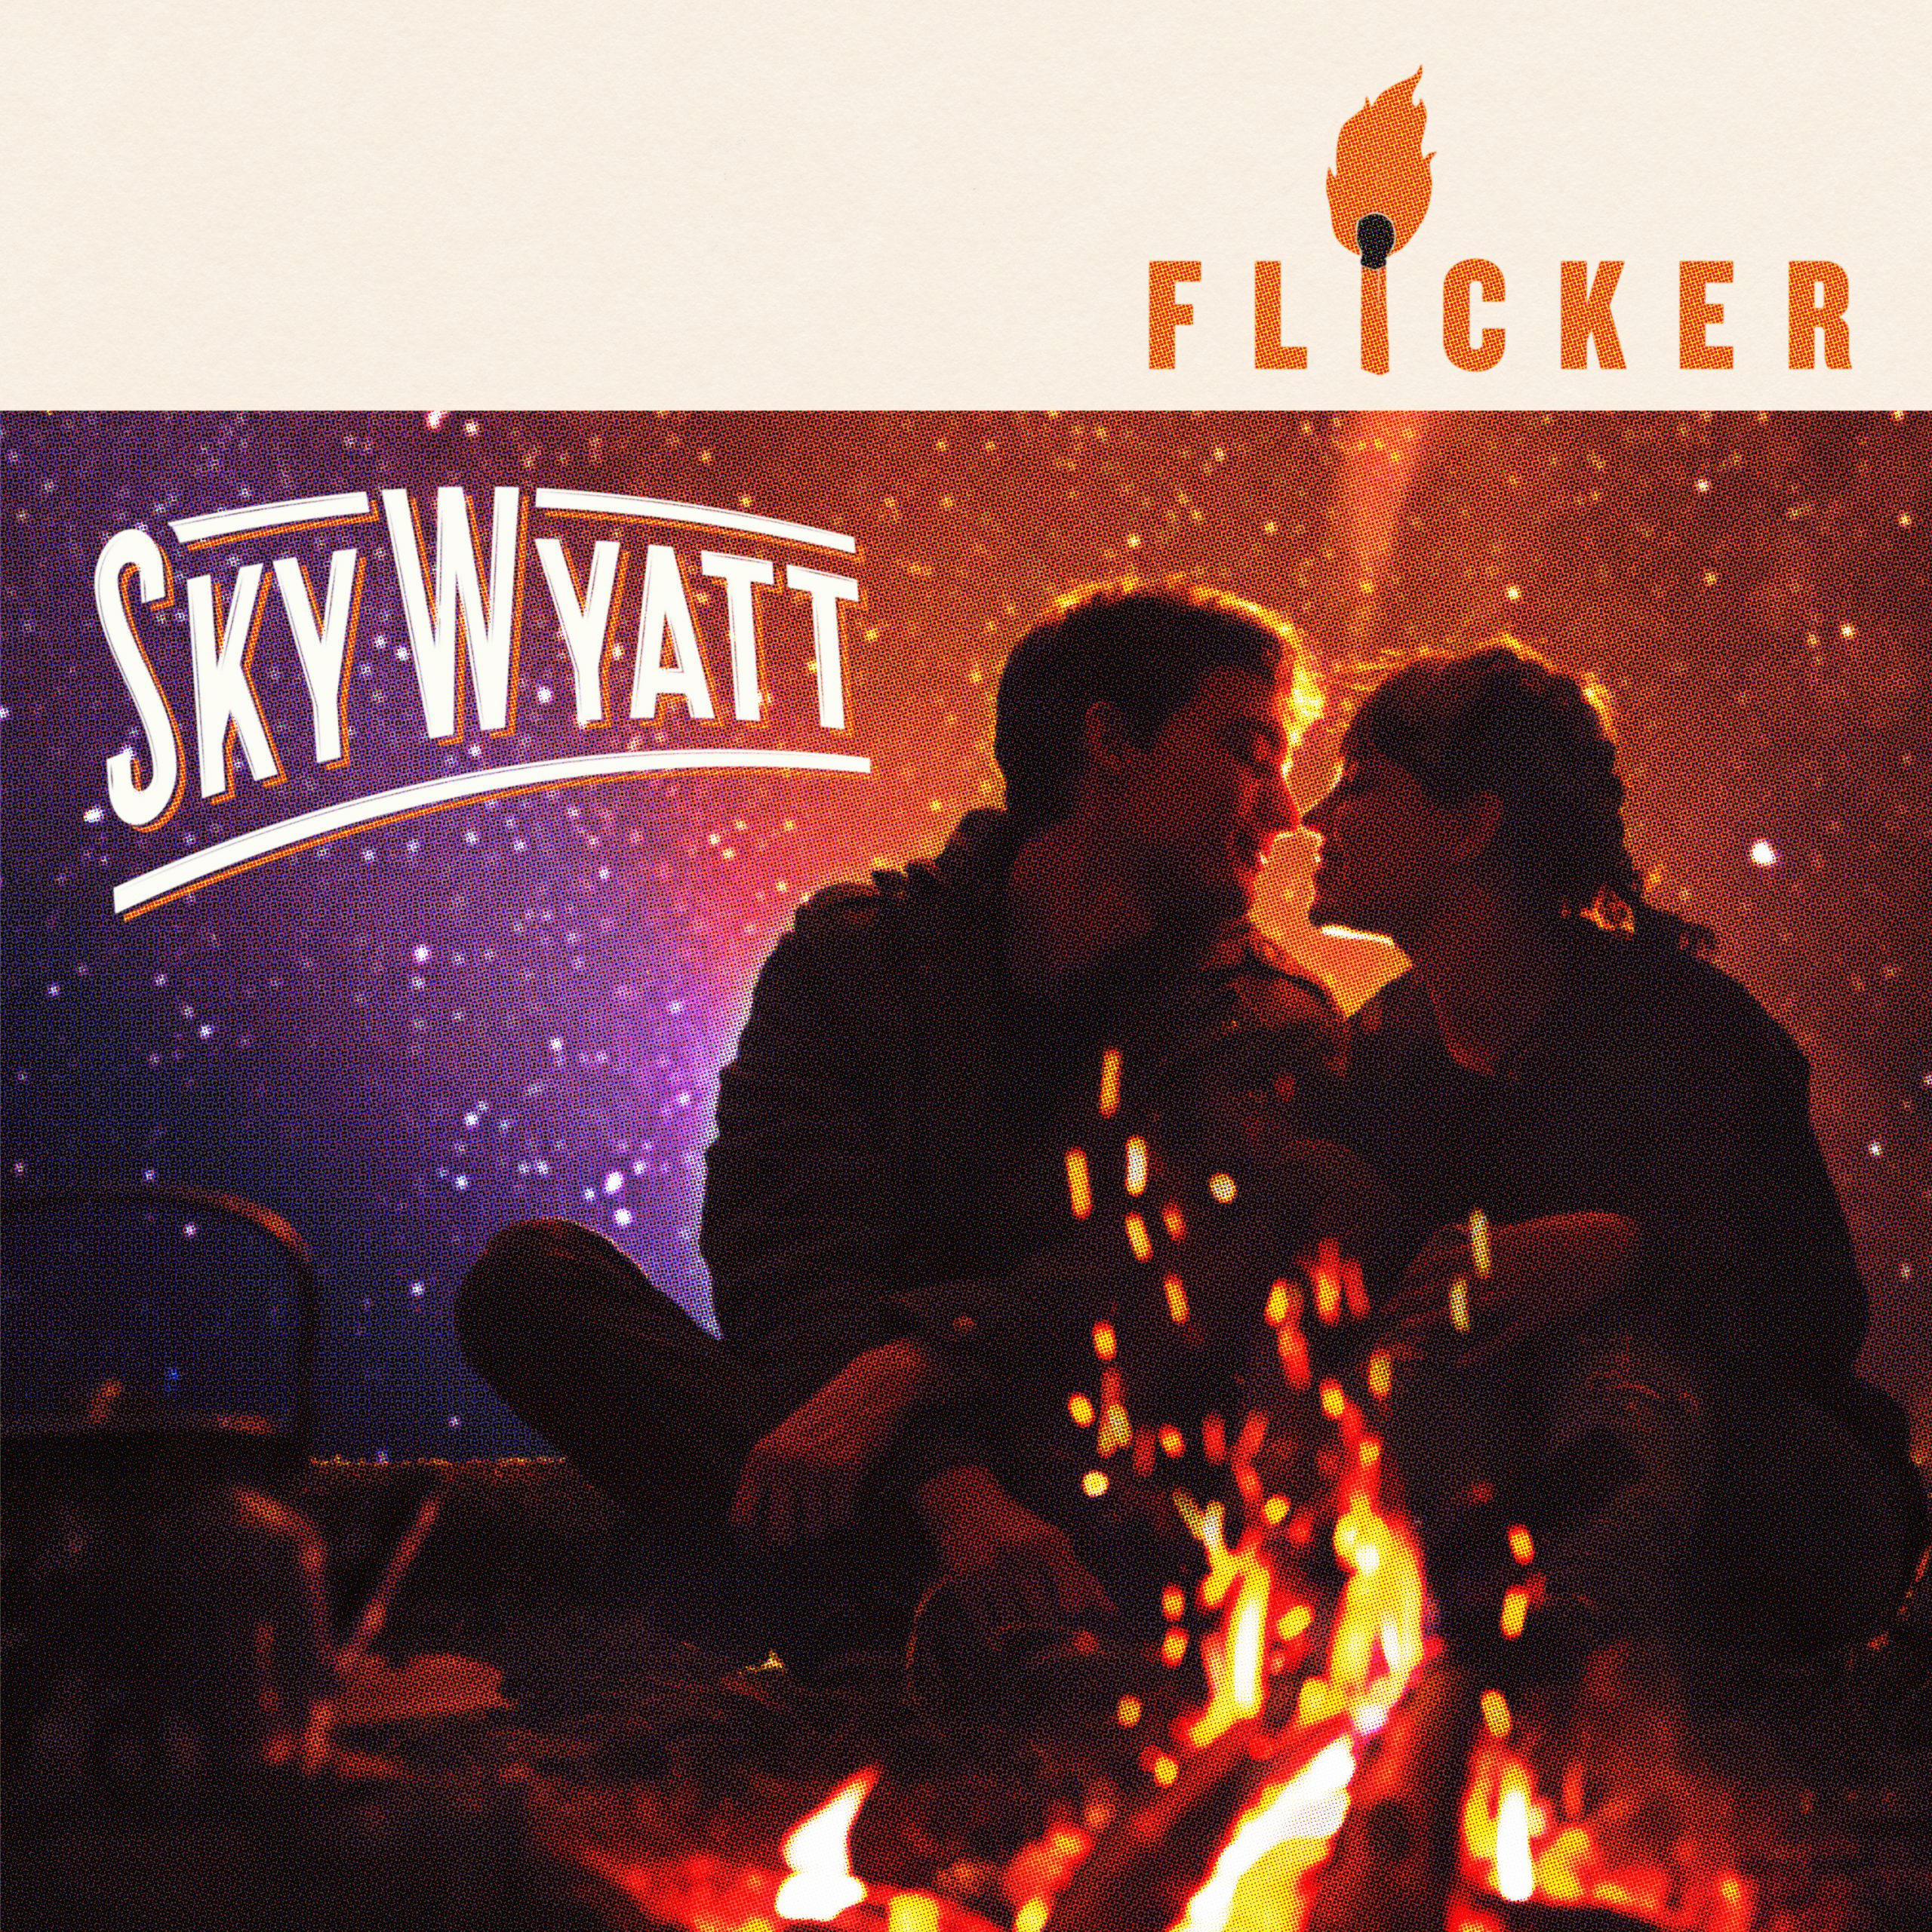 New song “Flicker” now playing at radio and SiriusXM